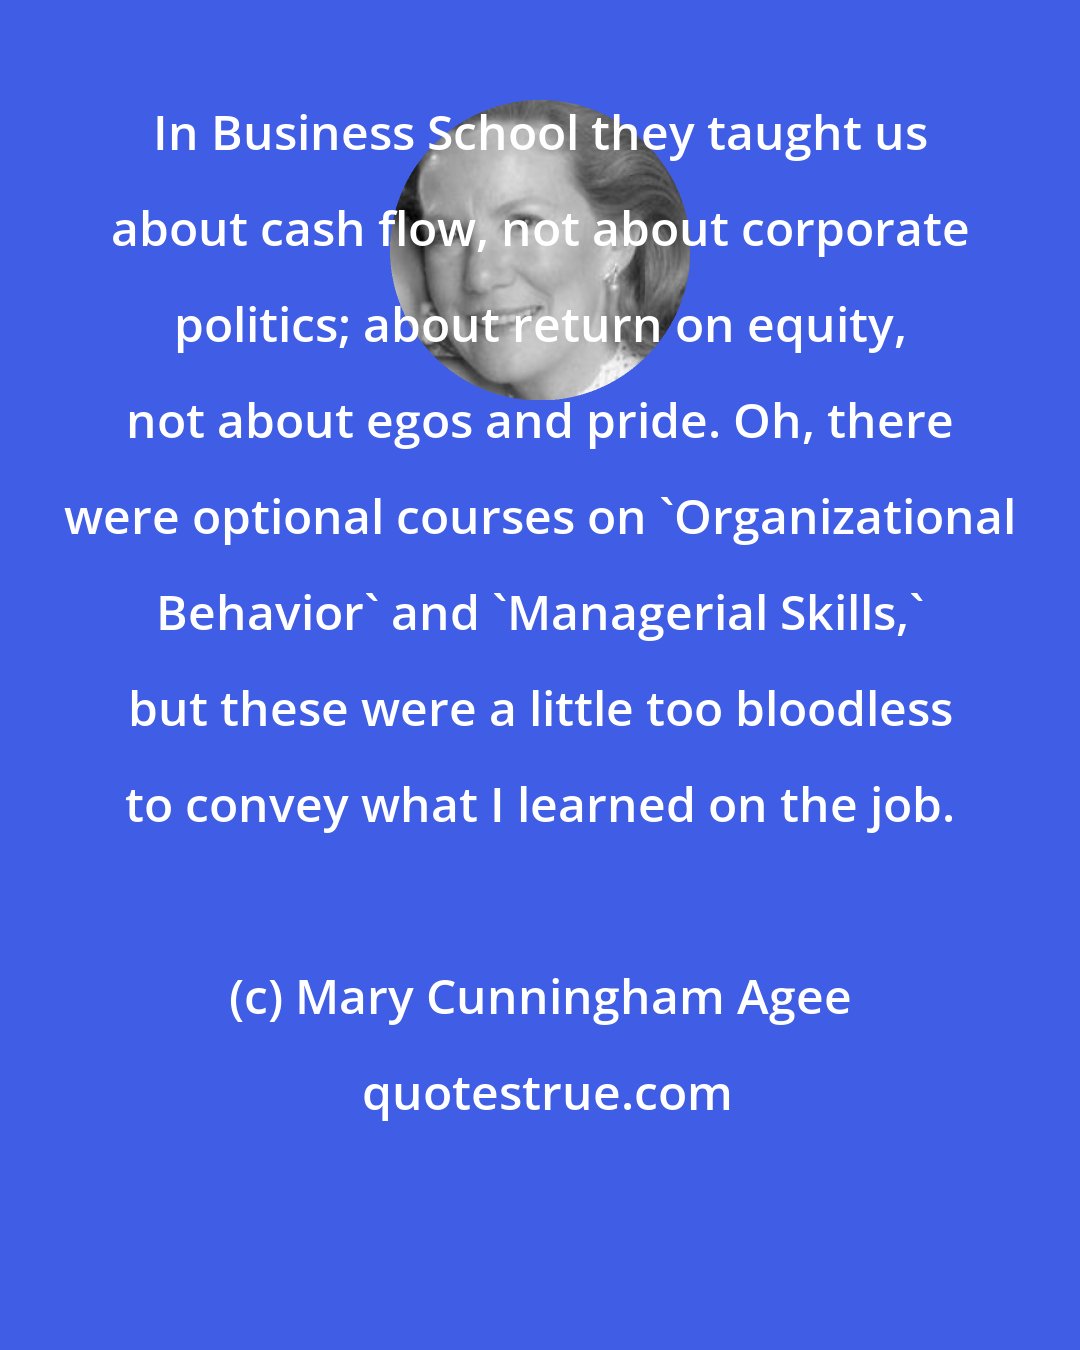 Mary Cunningham Agee: In Business School they taught us about cash flow, not about corporate politics; about return on equity, not about egos and pride. Oh, there were optional courses on 'Organizational Behavior' and 'Managerial Skills,' but these were a little too bloodless to convey what I learned on the job.